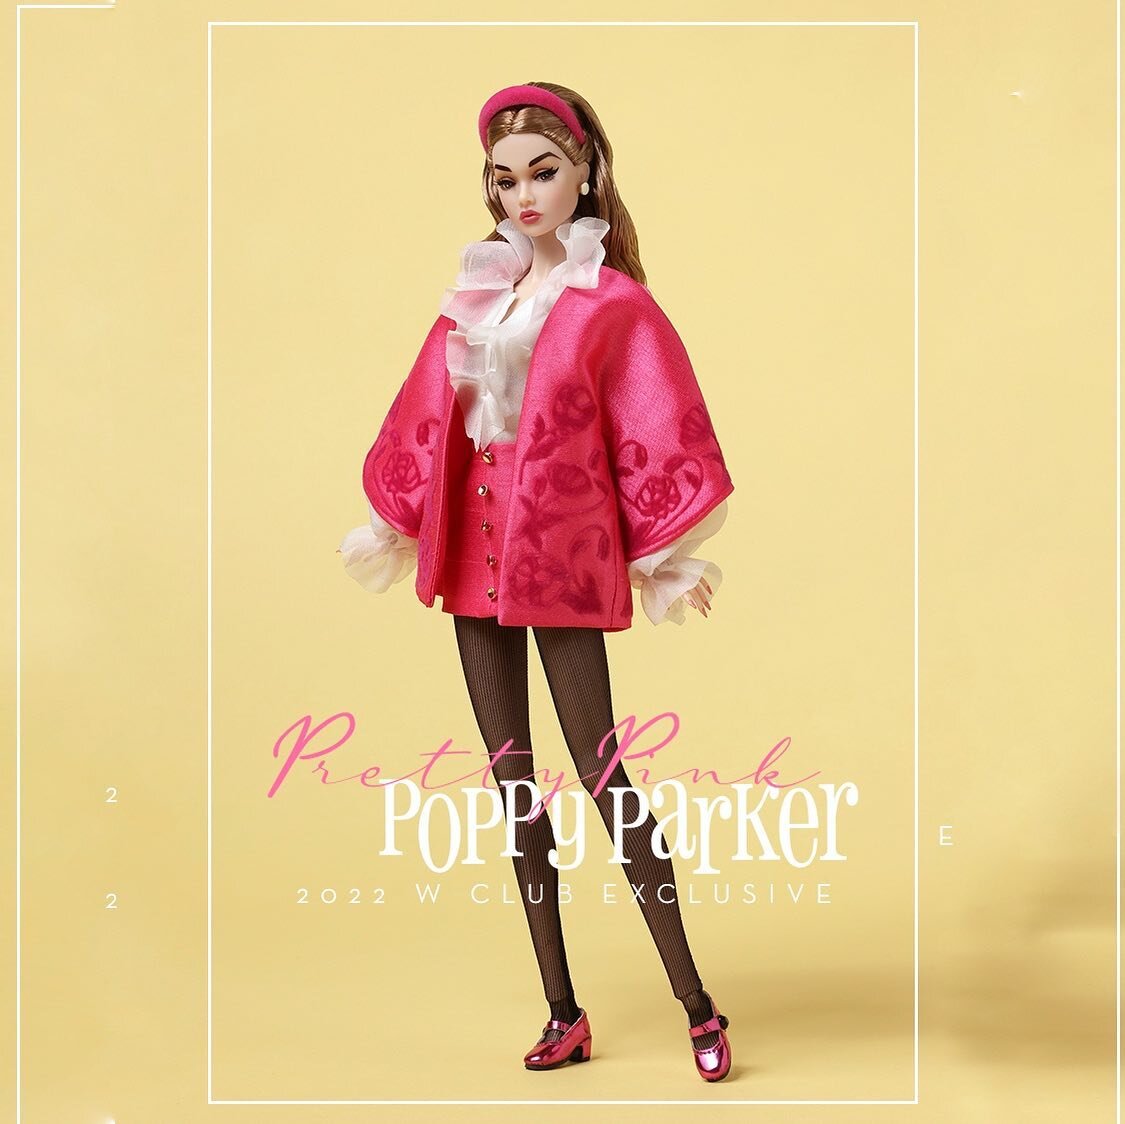 Pretty Pink Poppy Parker is the last W Club exclusive Doll for the 2022 membership. Designed by @thosedollyeyes she&rsquo;s quite a beauty! Read more in my website, link in bio and stories #prettypink #poppyparker #integritytoys #wclub #jessyayala #e